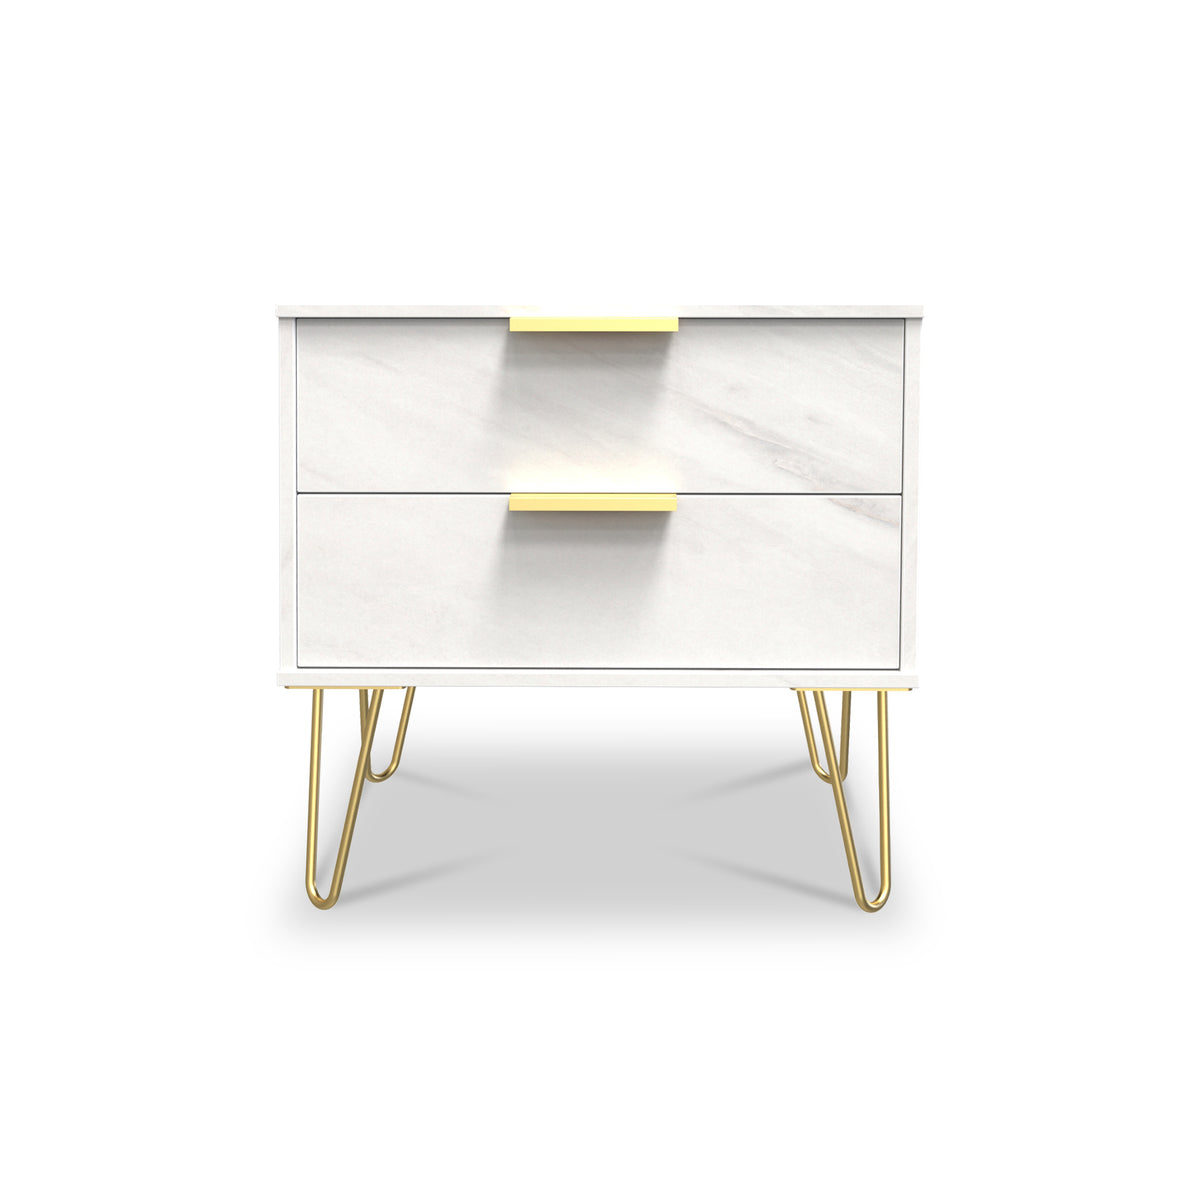 Moreno Marble Effect 2 Drawer Lamp Side Table